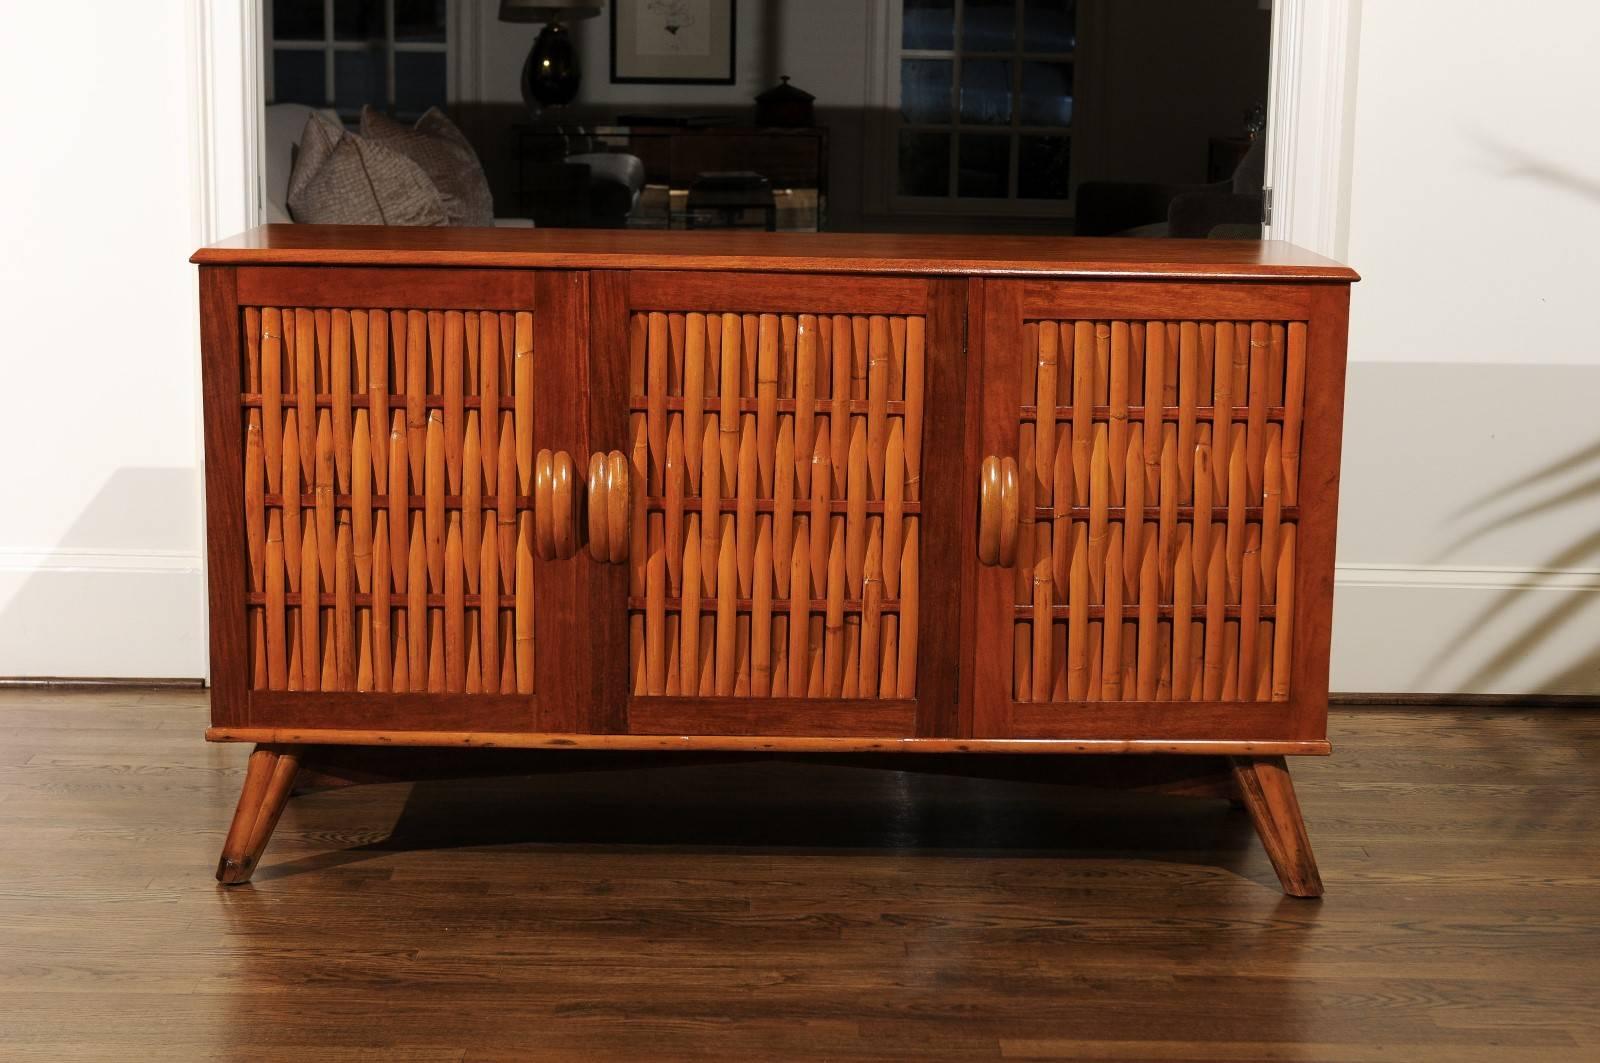 A stunning restored cabinet or buffet, circa 1940. Expertly crafted solid mahogany case construction with basket weave inset doors fashioned from strips of bamboo. Base is comprised of rattan feet connected with mahogany stretchers. Simple rattan